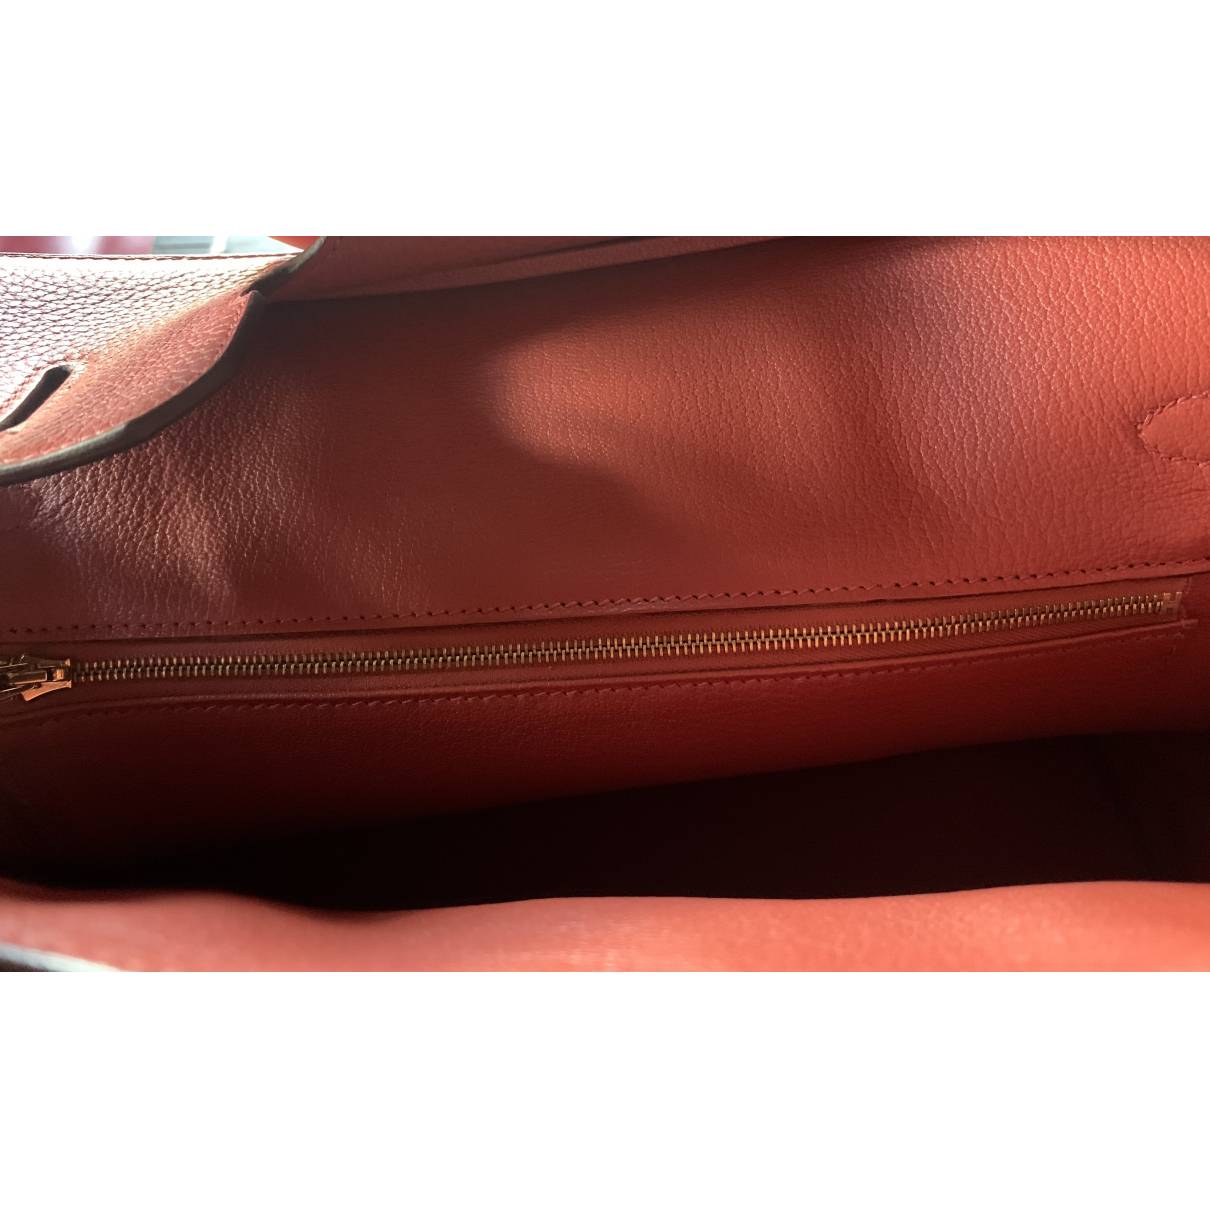 Hermès - Authenticated Birkin 35 Handbag - Leather Red Plain for Women, Very Good Condition